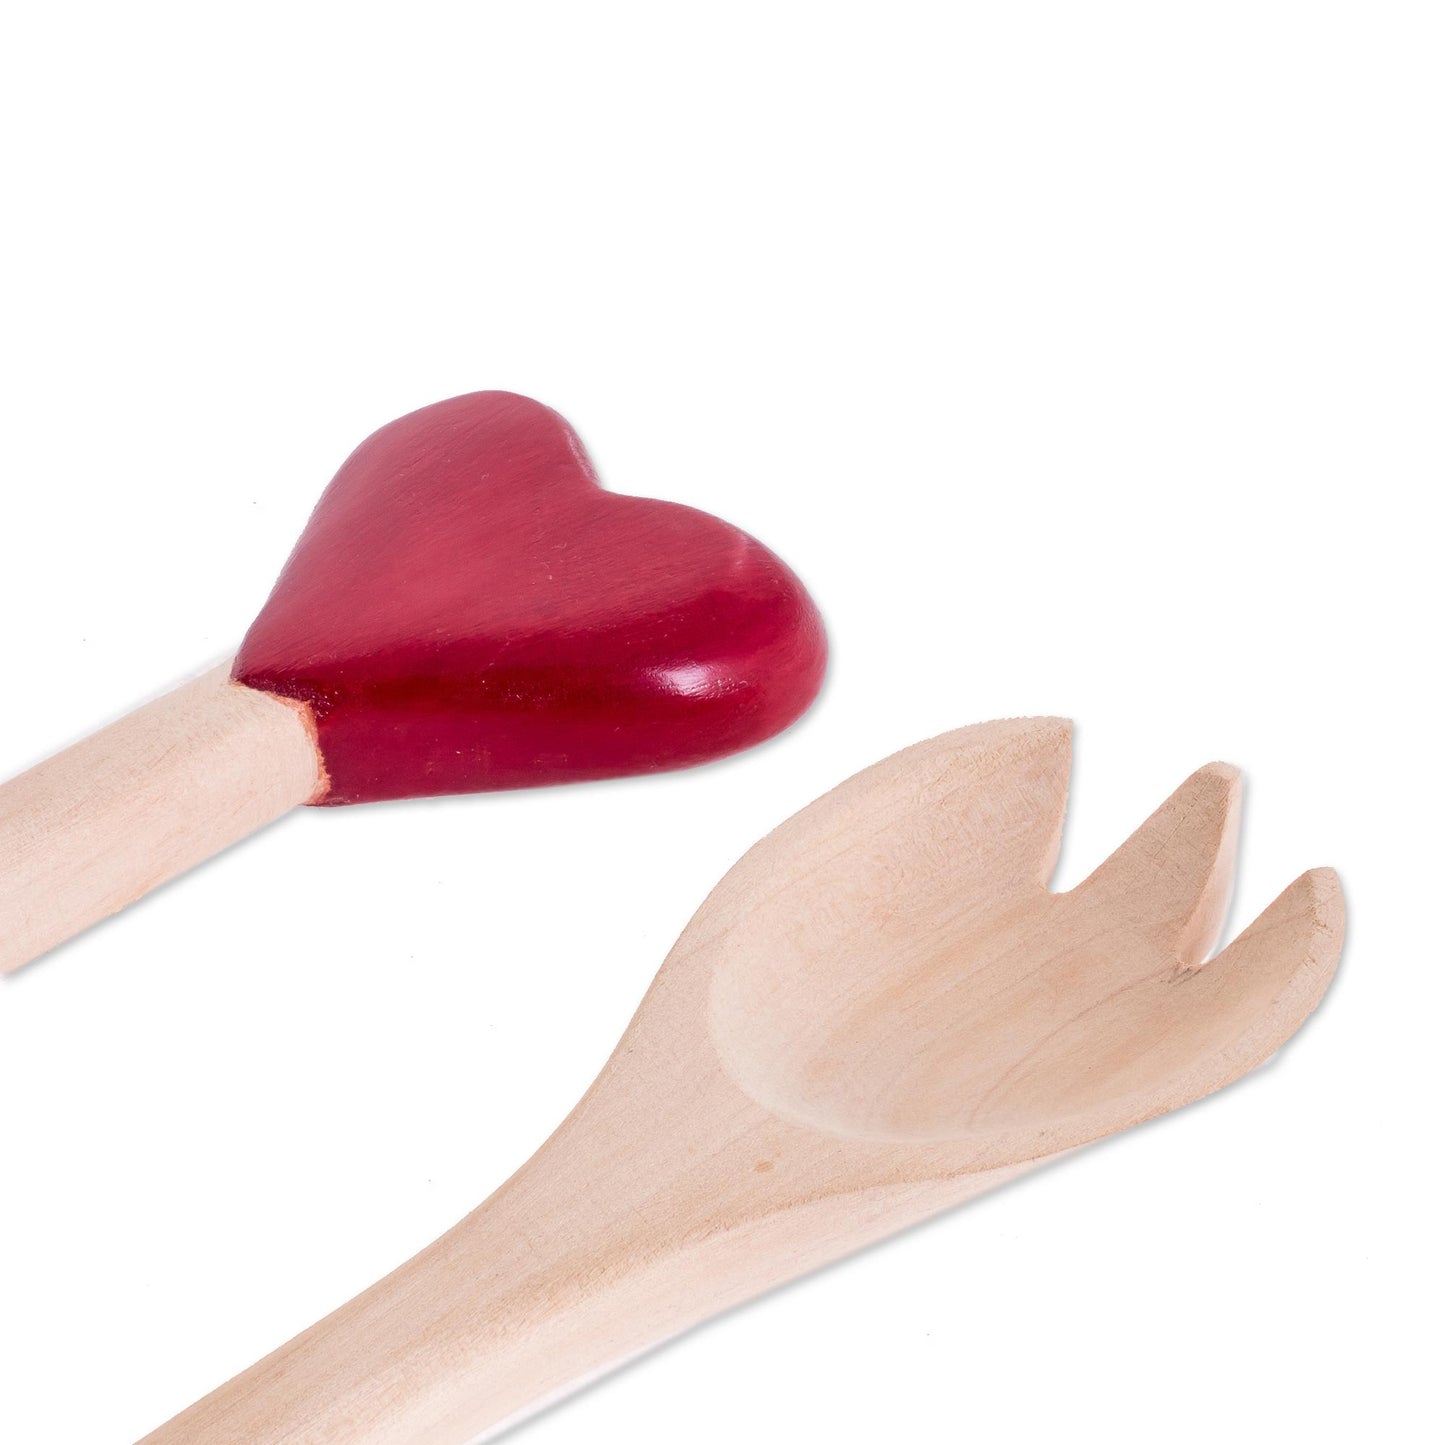 Unconditional Love Heart-Themed Wood Serving Utensils from Guatemala (Pair)